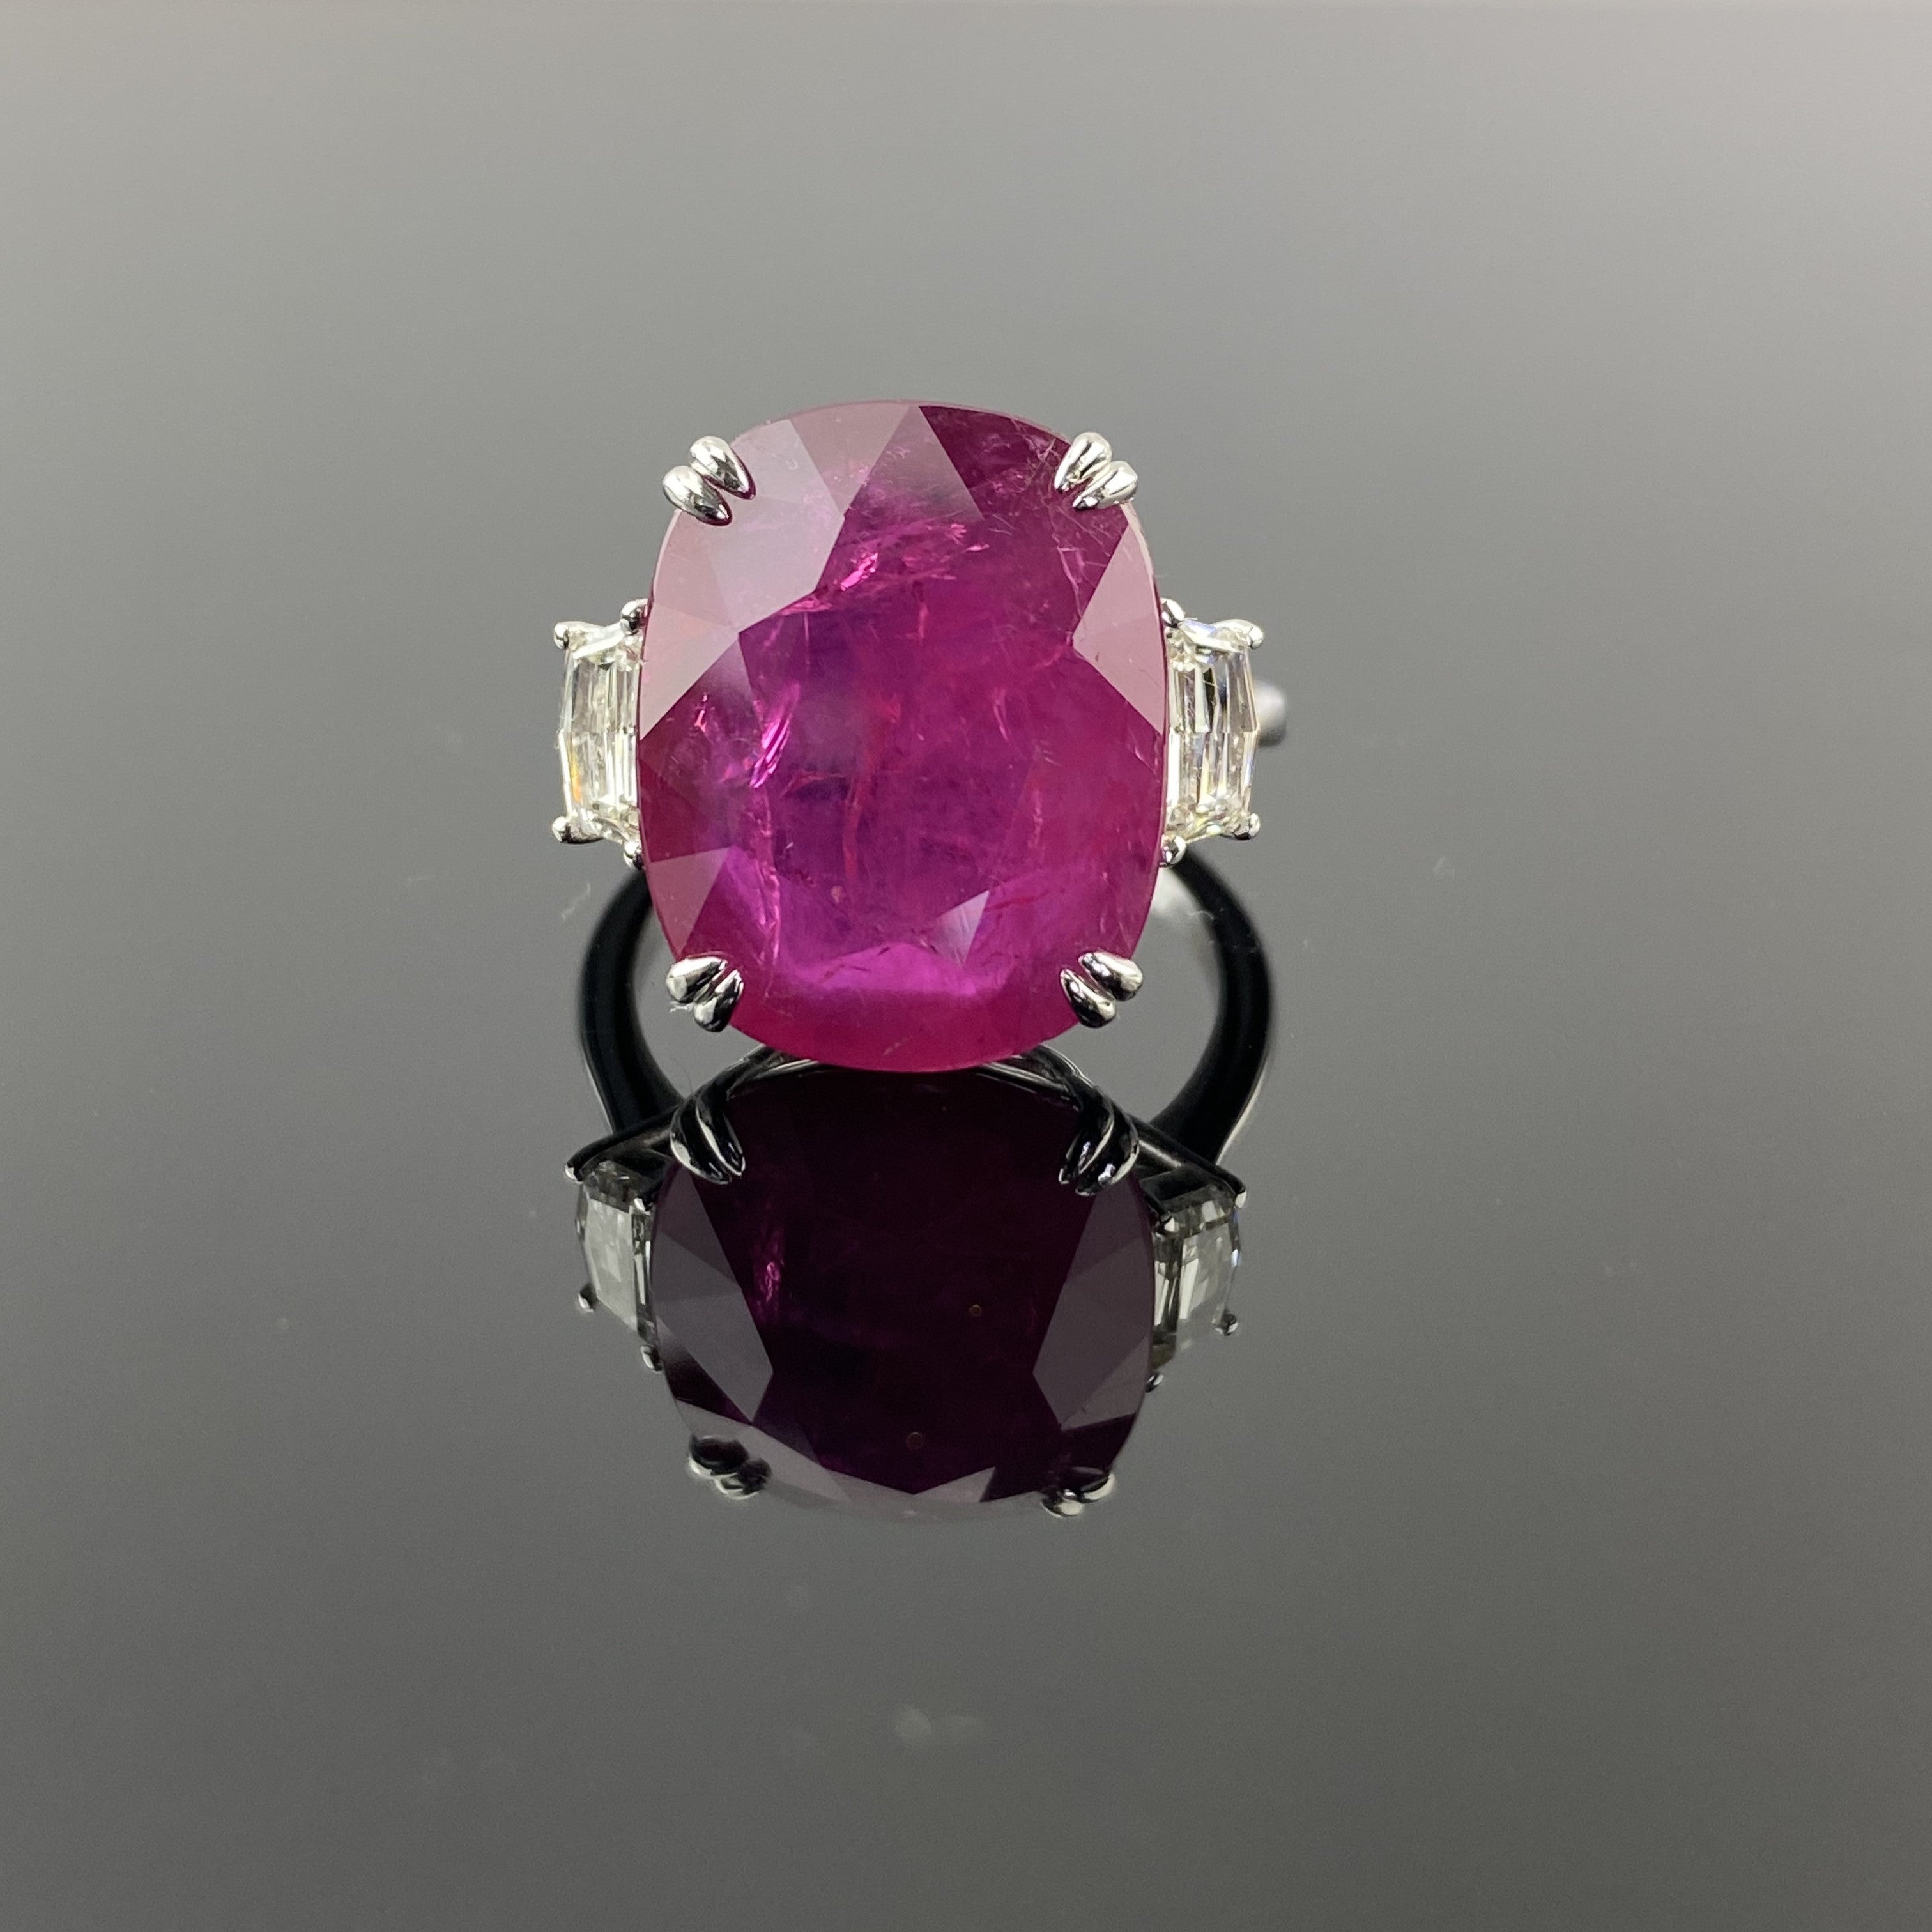 A beautiful ring set in 18K White Gold featuring a 12.51 Carat natural, red, heated Burma Ruby and 2 cadillac shaped diamonds weighing 0.60 Carats total.  

Rubies are referred to as 